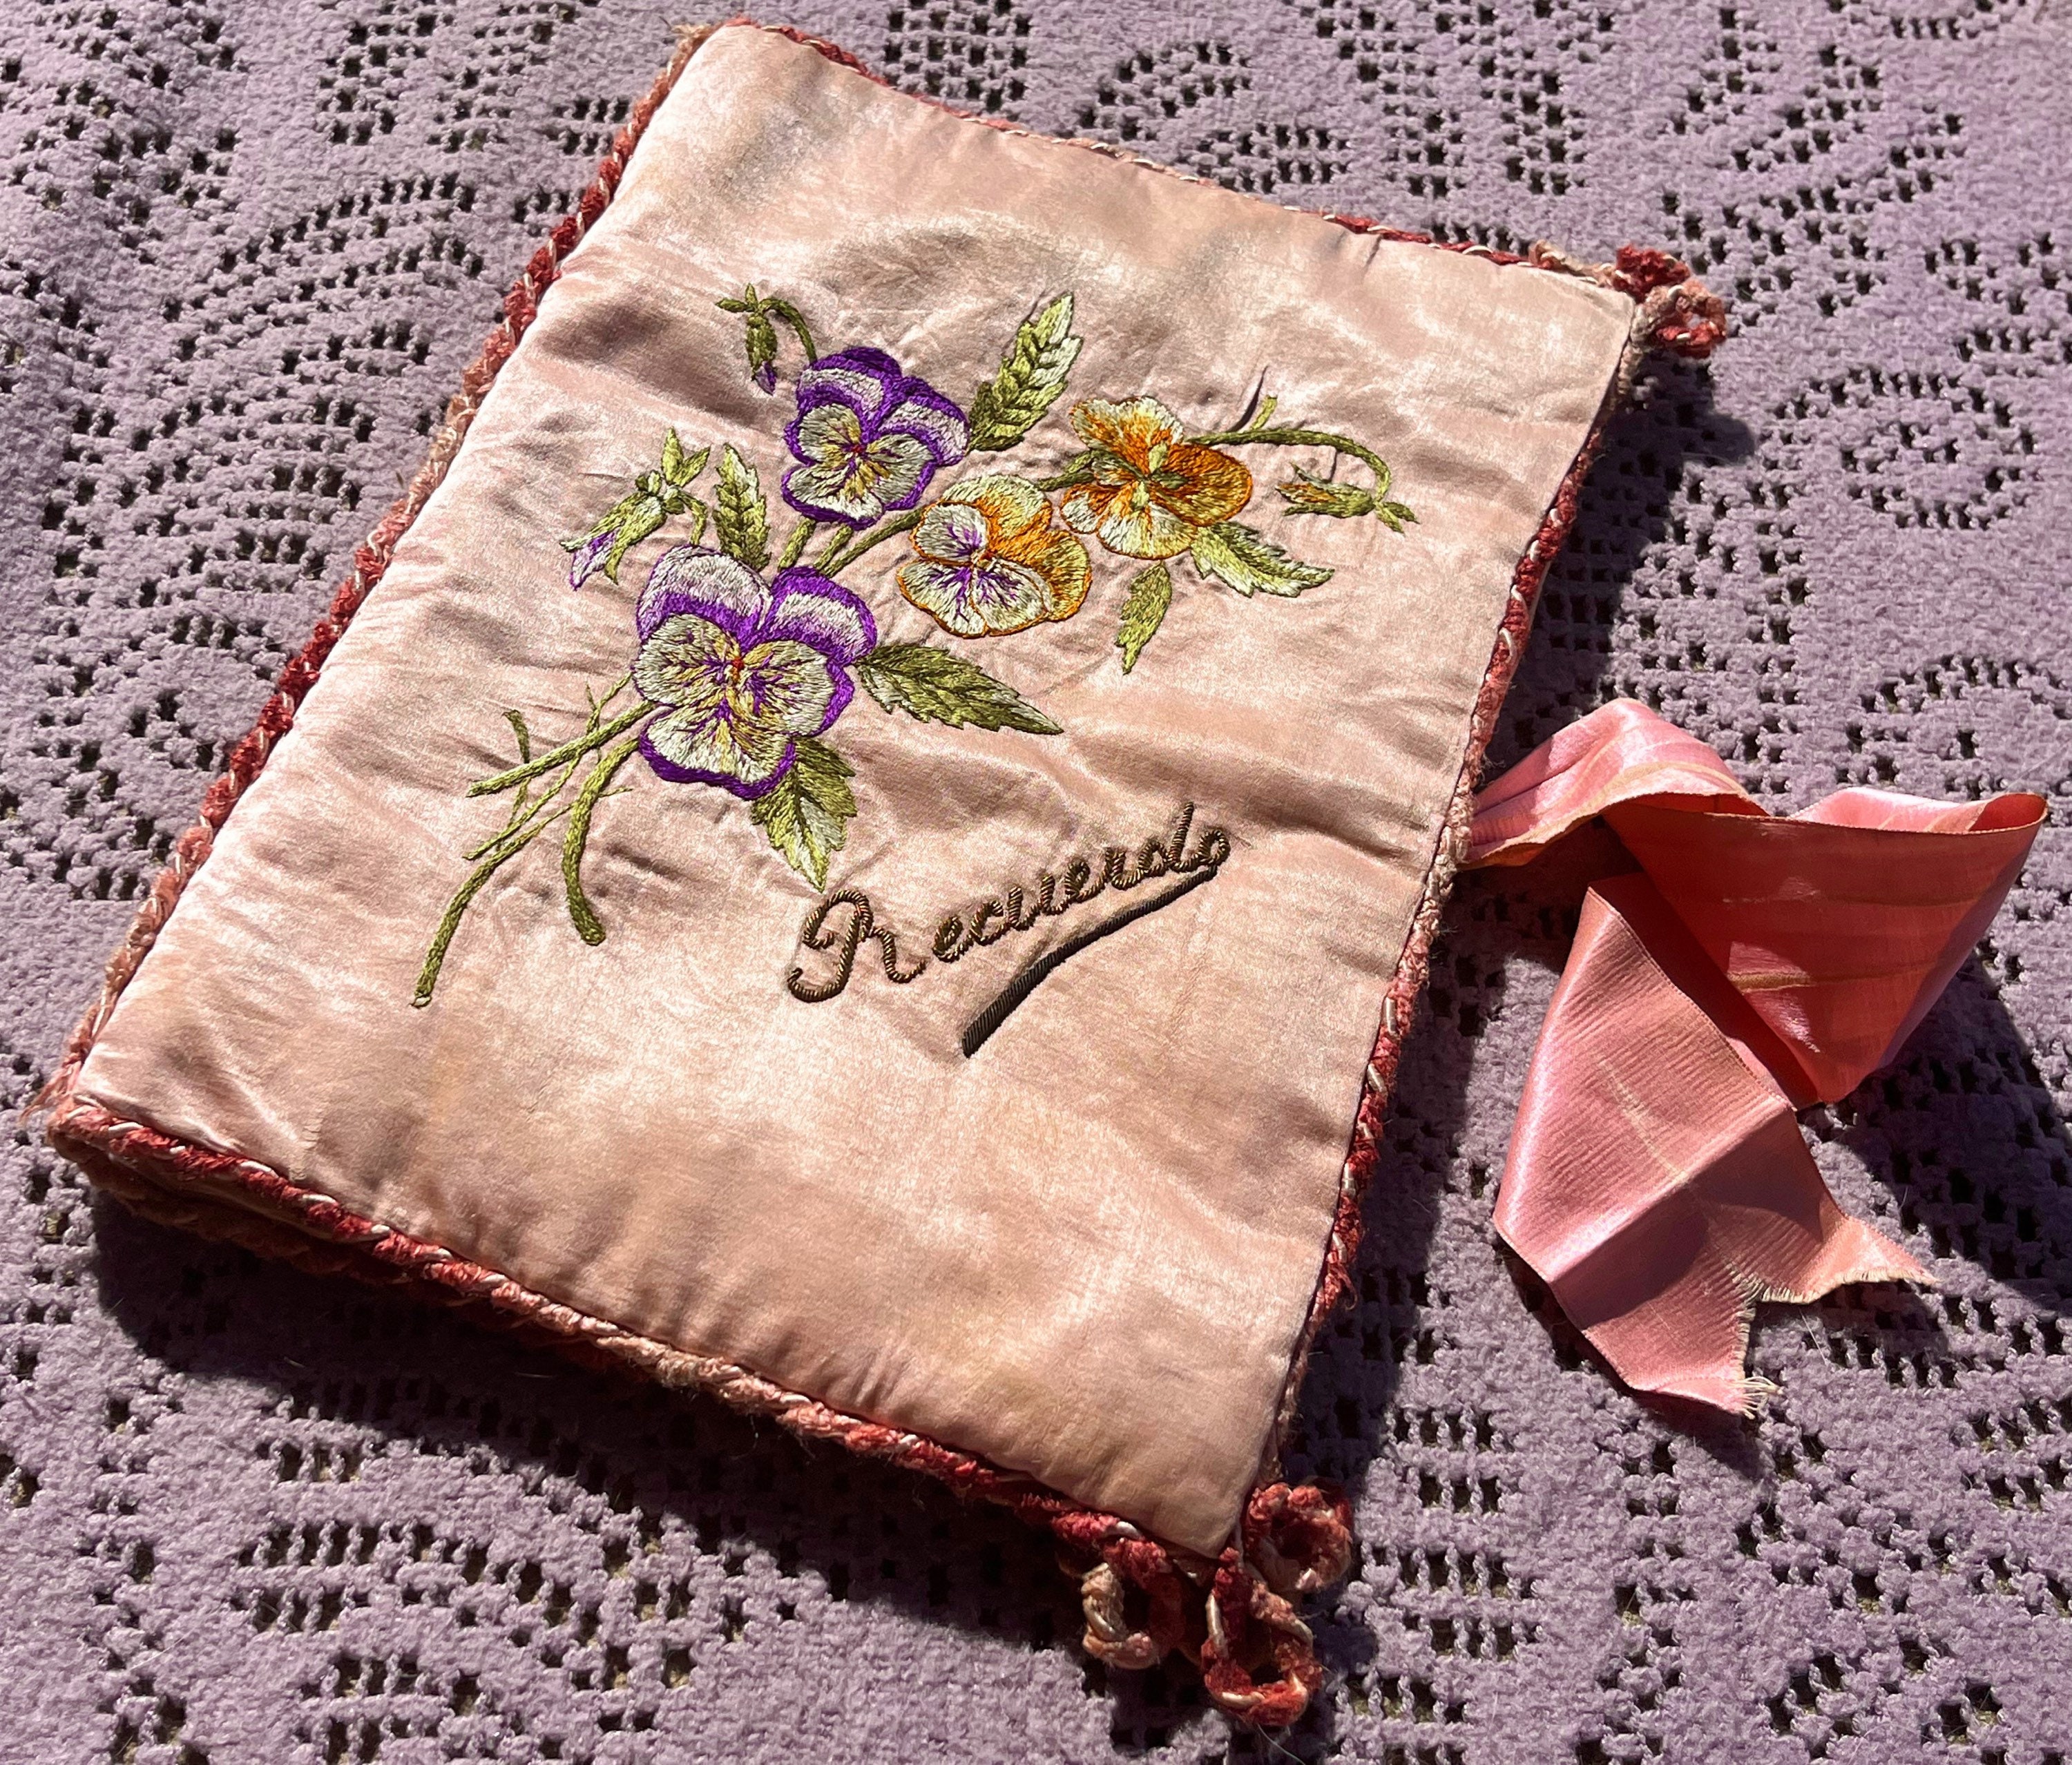 Linen Pochette / Hand Made Embroidery / Natural Cosmetic / Linen Poucz /  Toiletry Bag / Organizer / Linen Cosmetic Bag / Polish Folk Pattern 